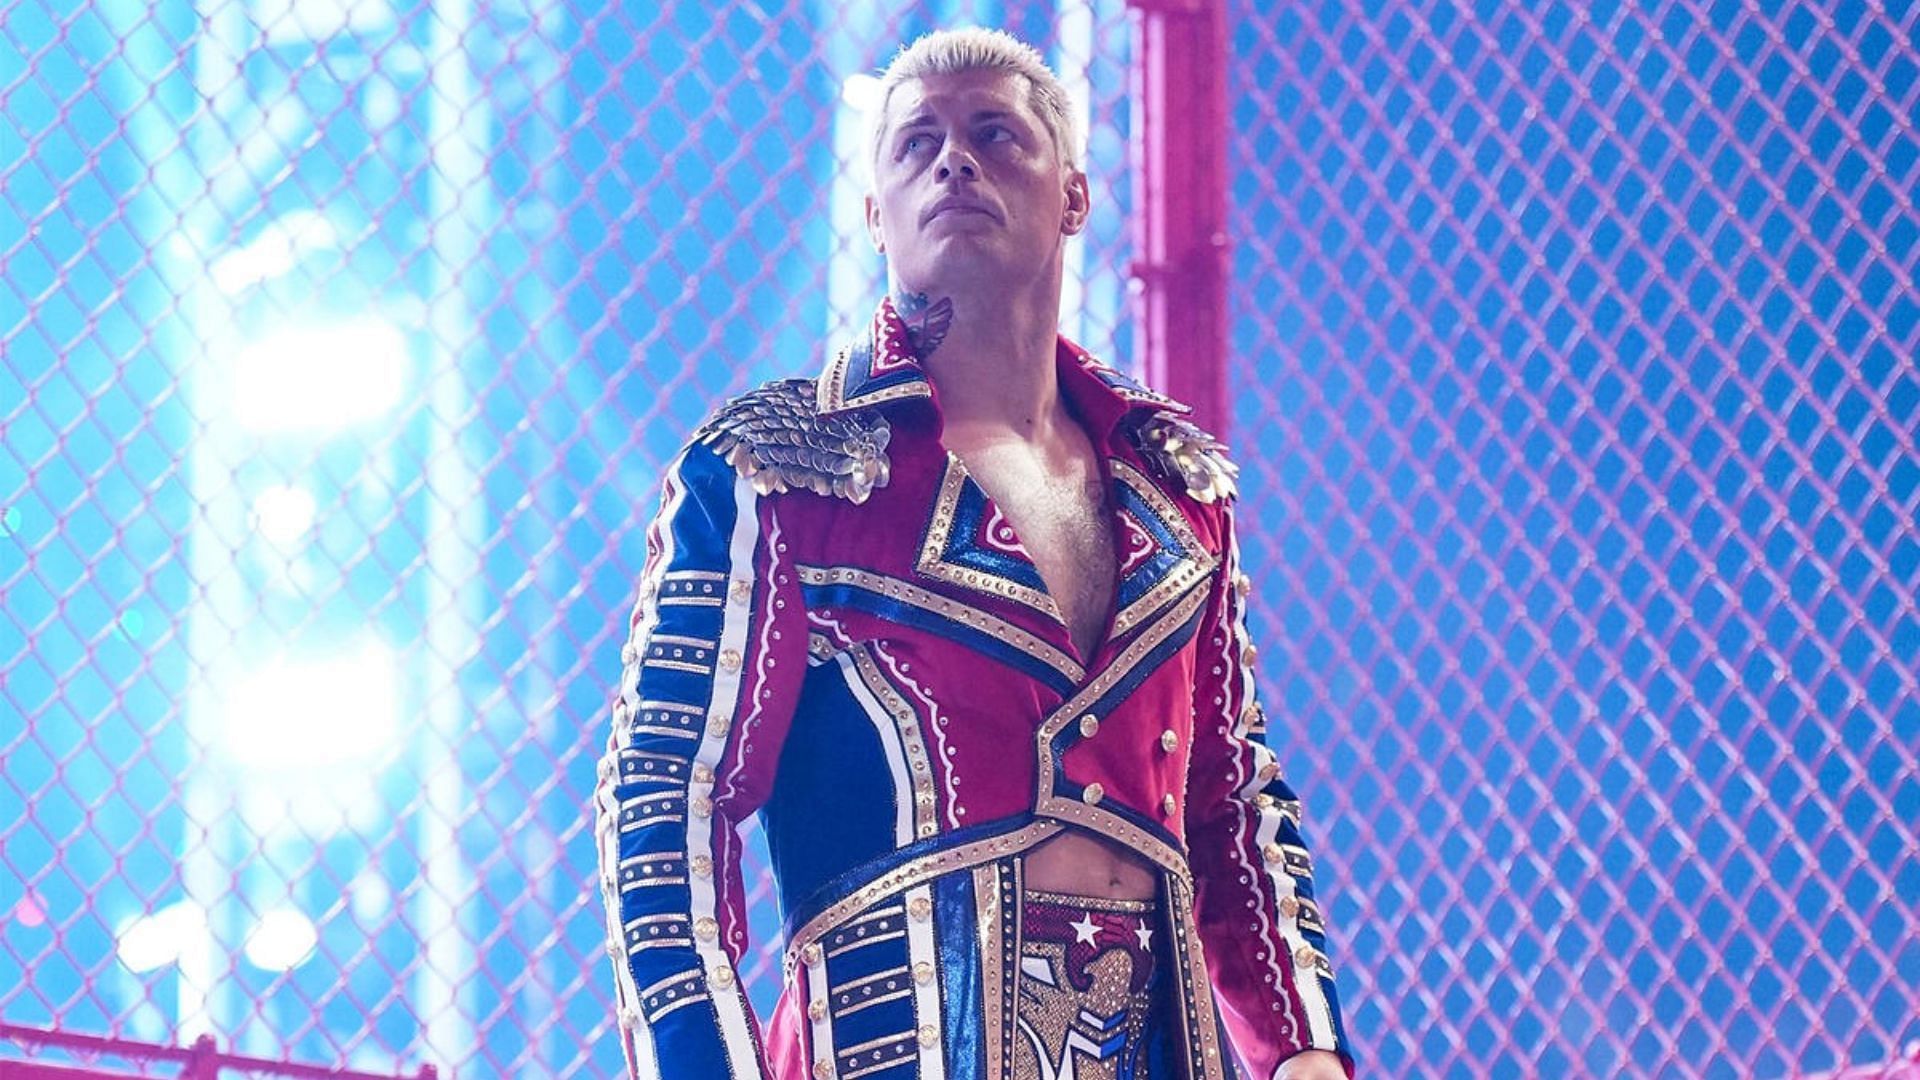 Cody Rhodes is yet to choose his WrestleMania opponent